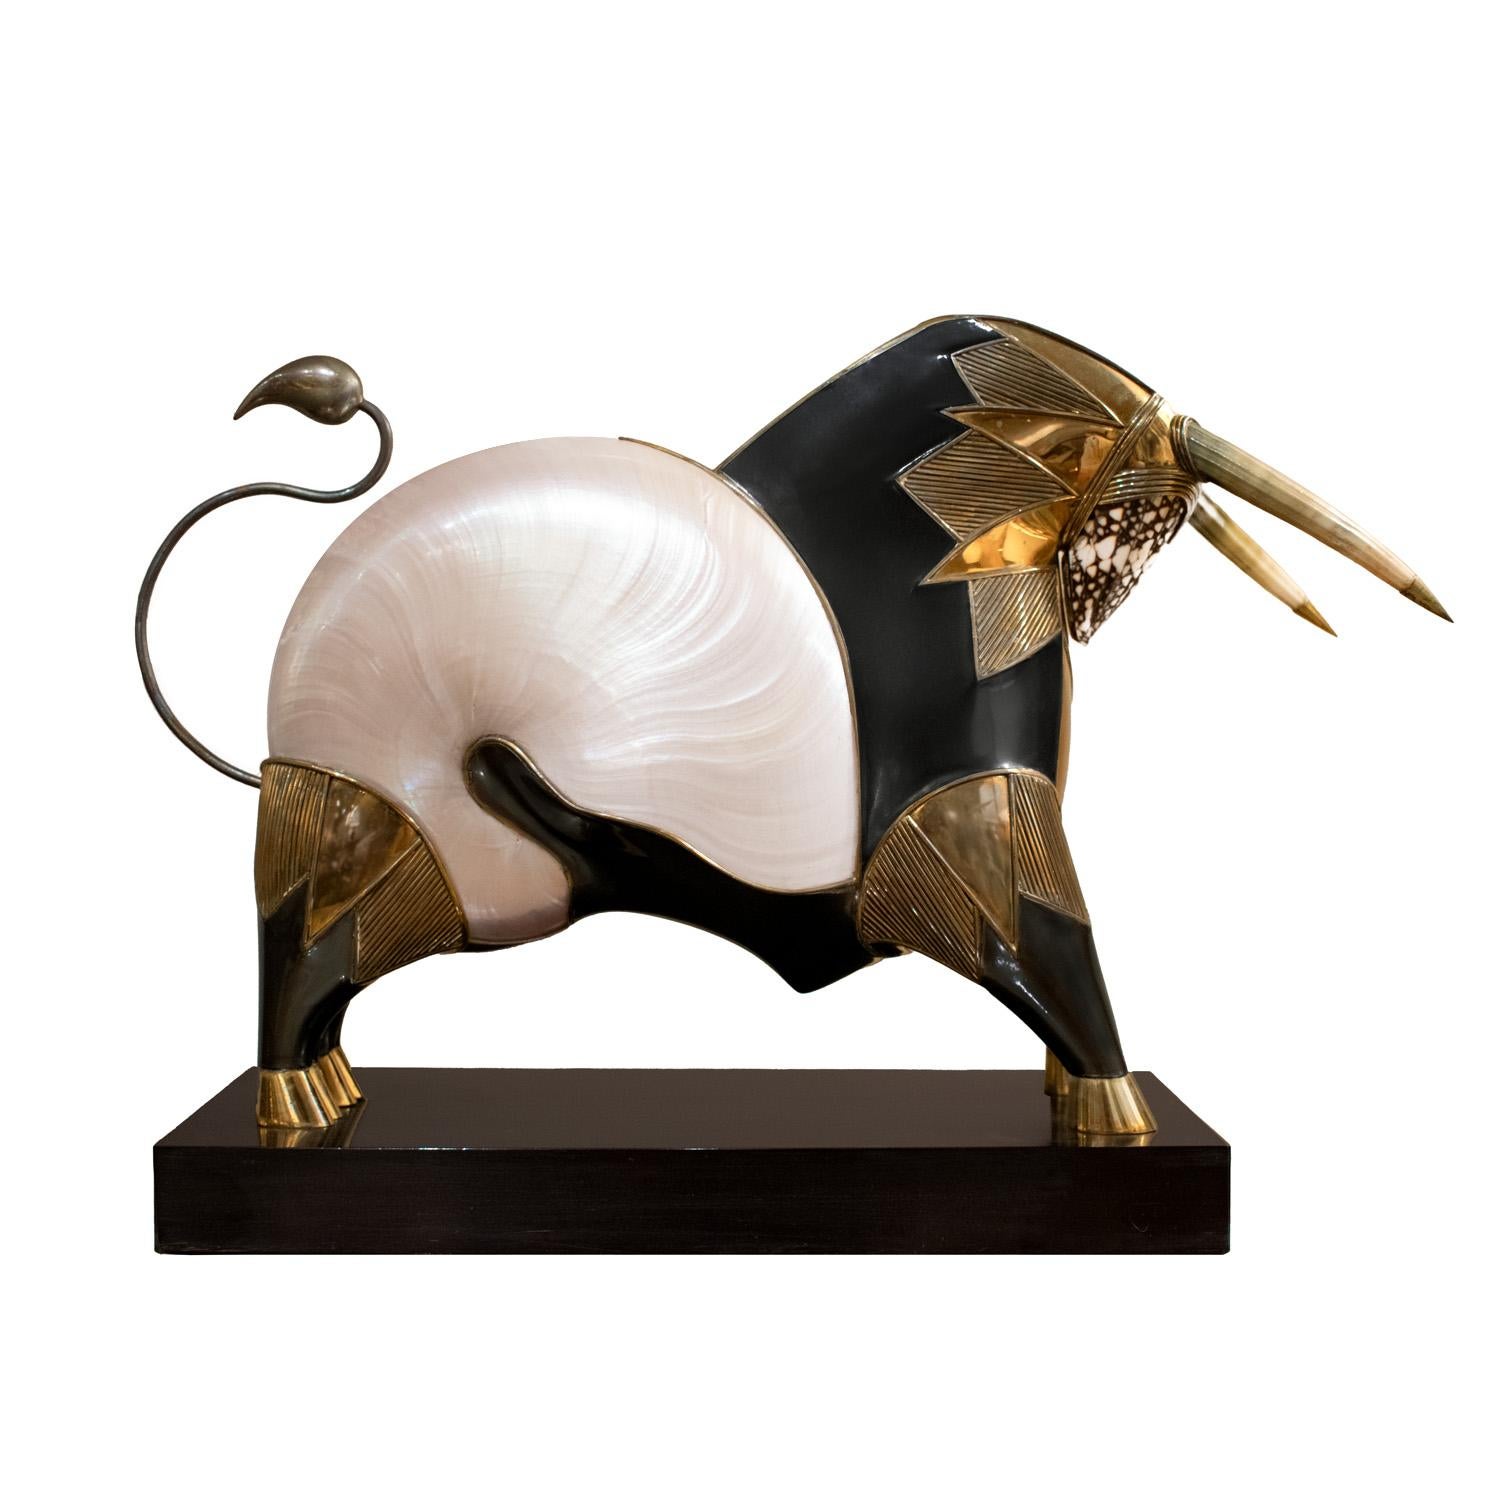 Hand-Crafted Roberto Estevez Exquisite Bull Sculpture with Sea Shells 1980s 'Signed'